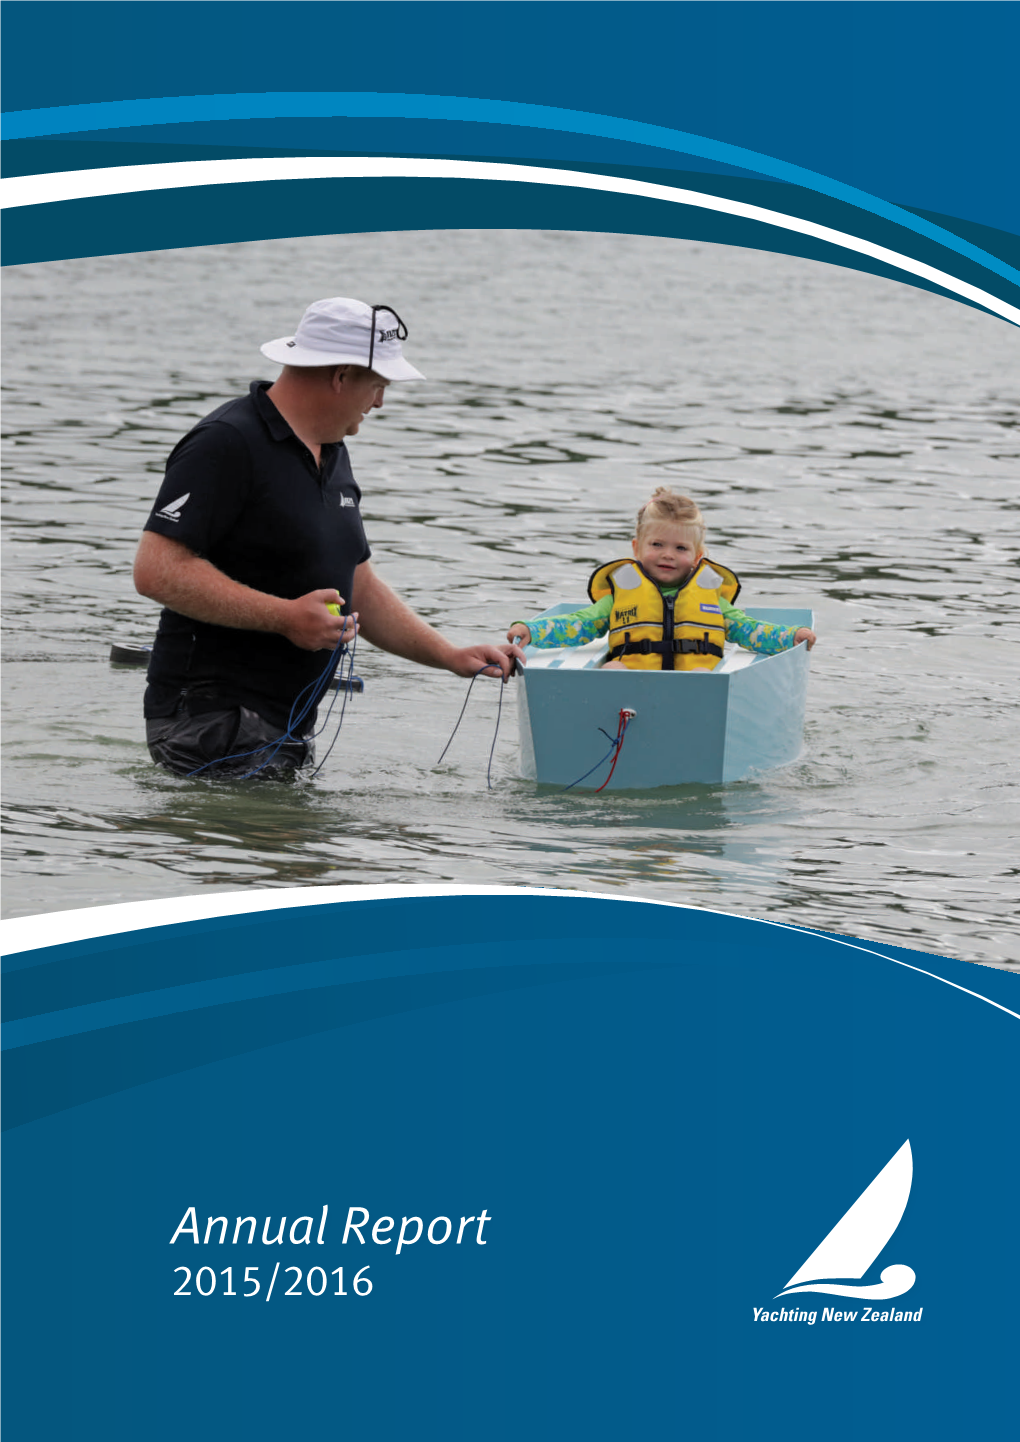 Annual Report 2015/2016 Helping New Zealanders Access, Enjoy and Succeed on the Water for Life